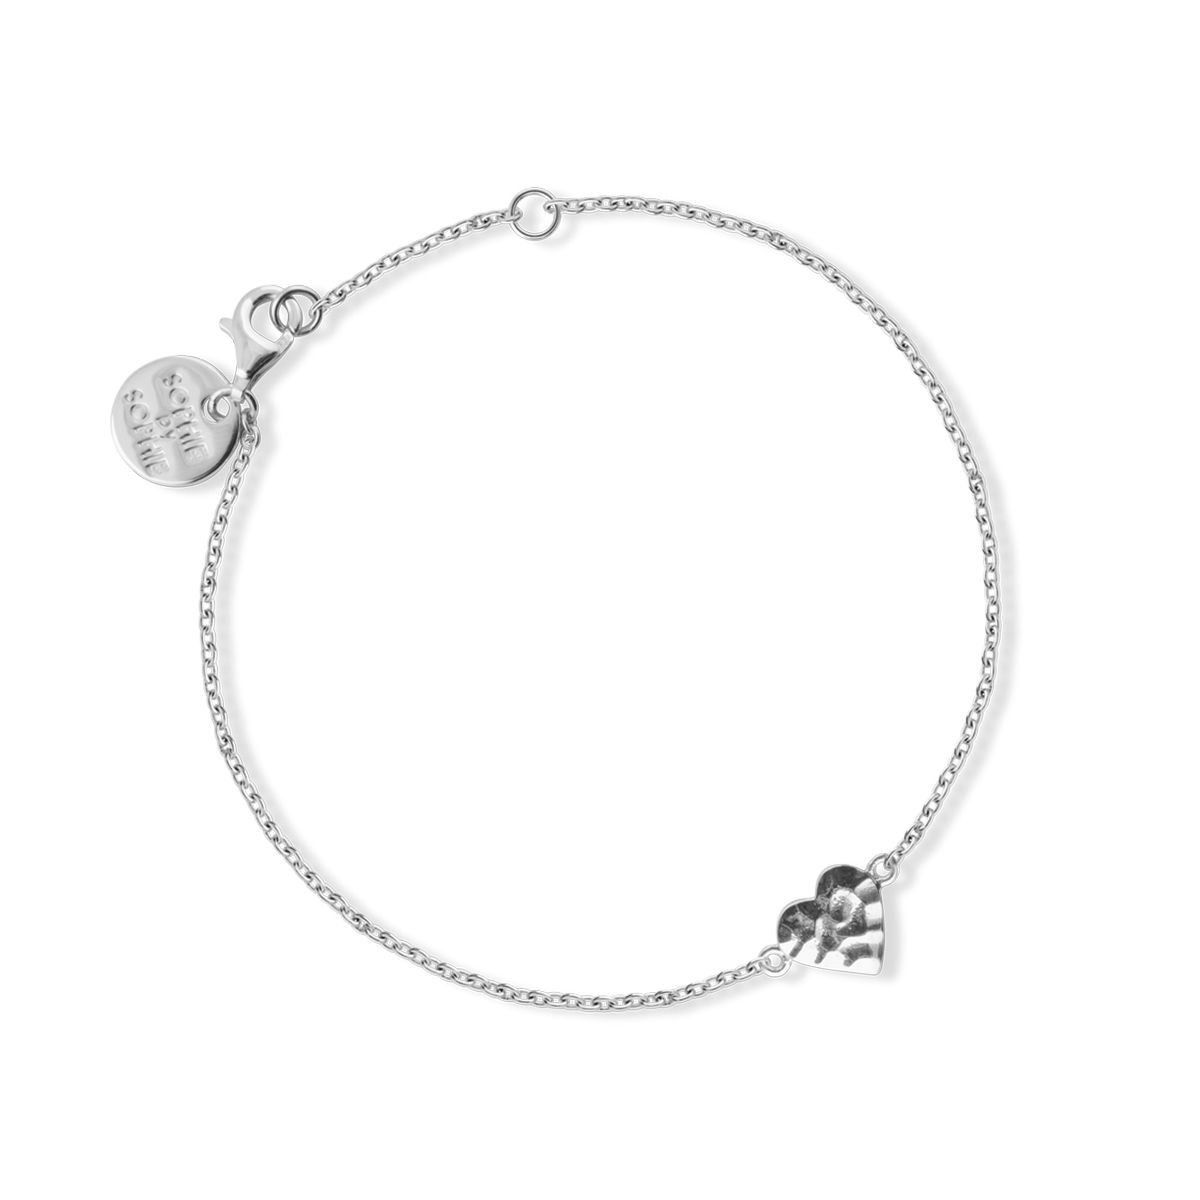 Sophie by Sophie – Wild Heart armband, silver